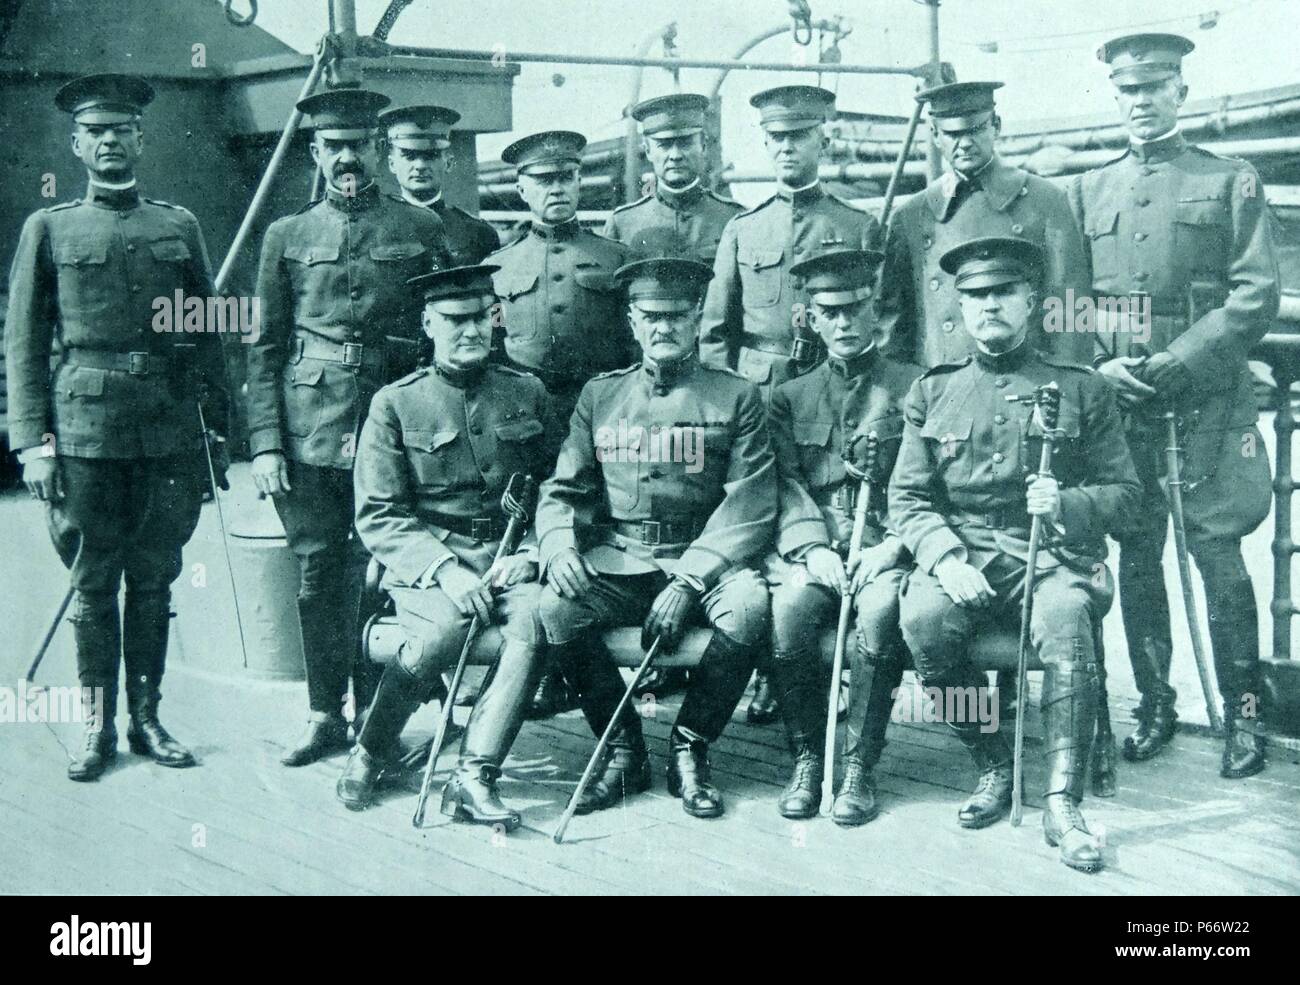 John Joseph Pershing (September 13, 1860 – July 15, 1948), who led the American Expeditionary Forces in World War I. Departing for Europe on board the USA transport ship Invicta. 1917 Stock Photo